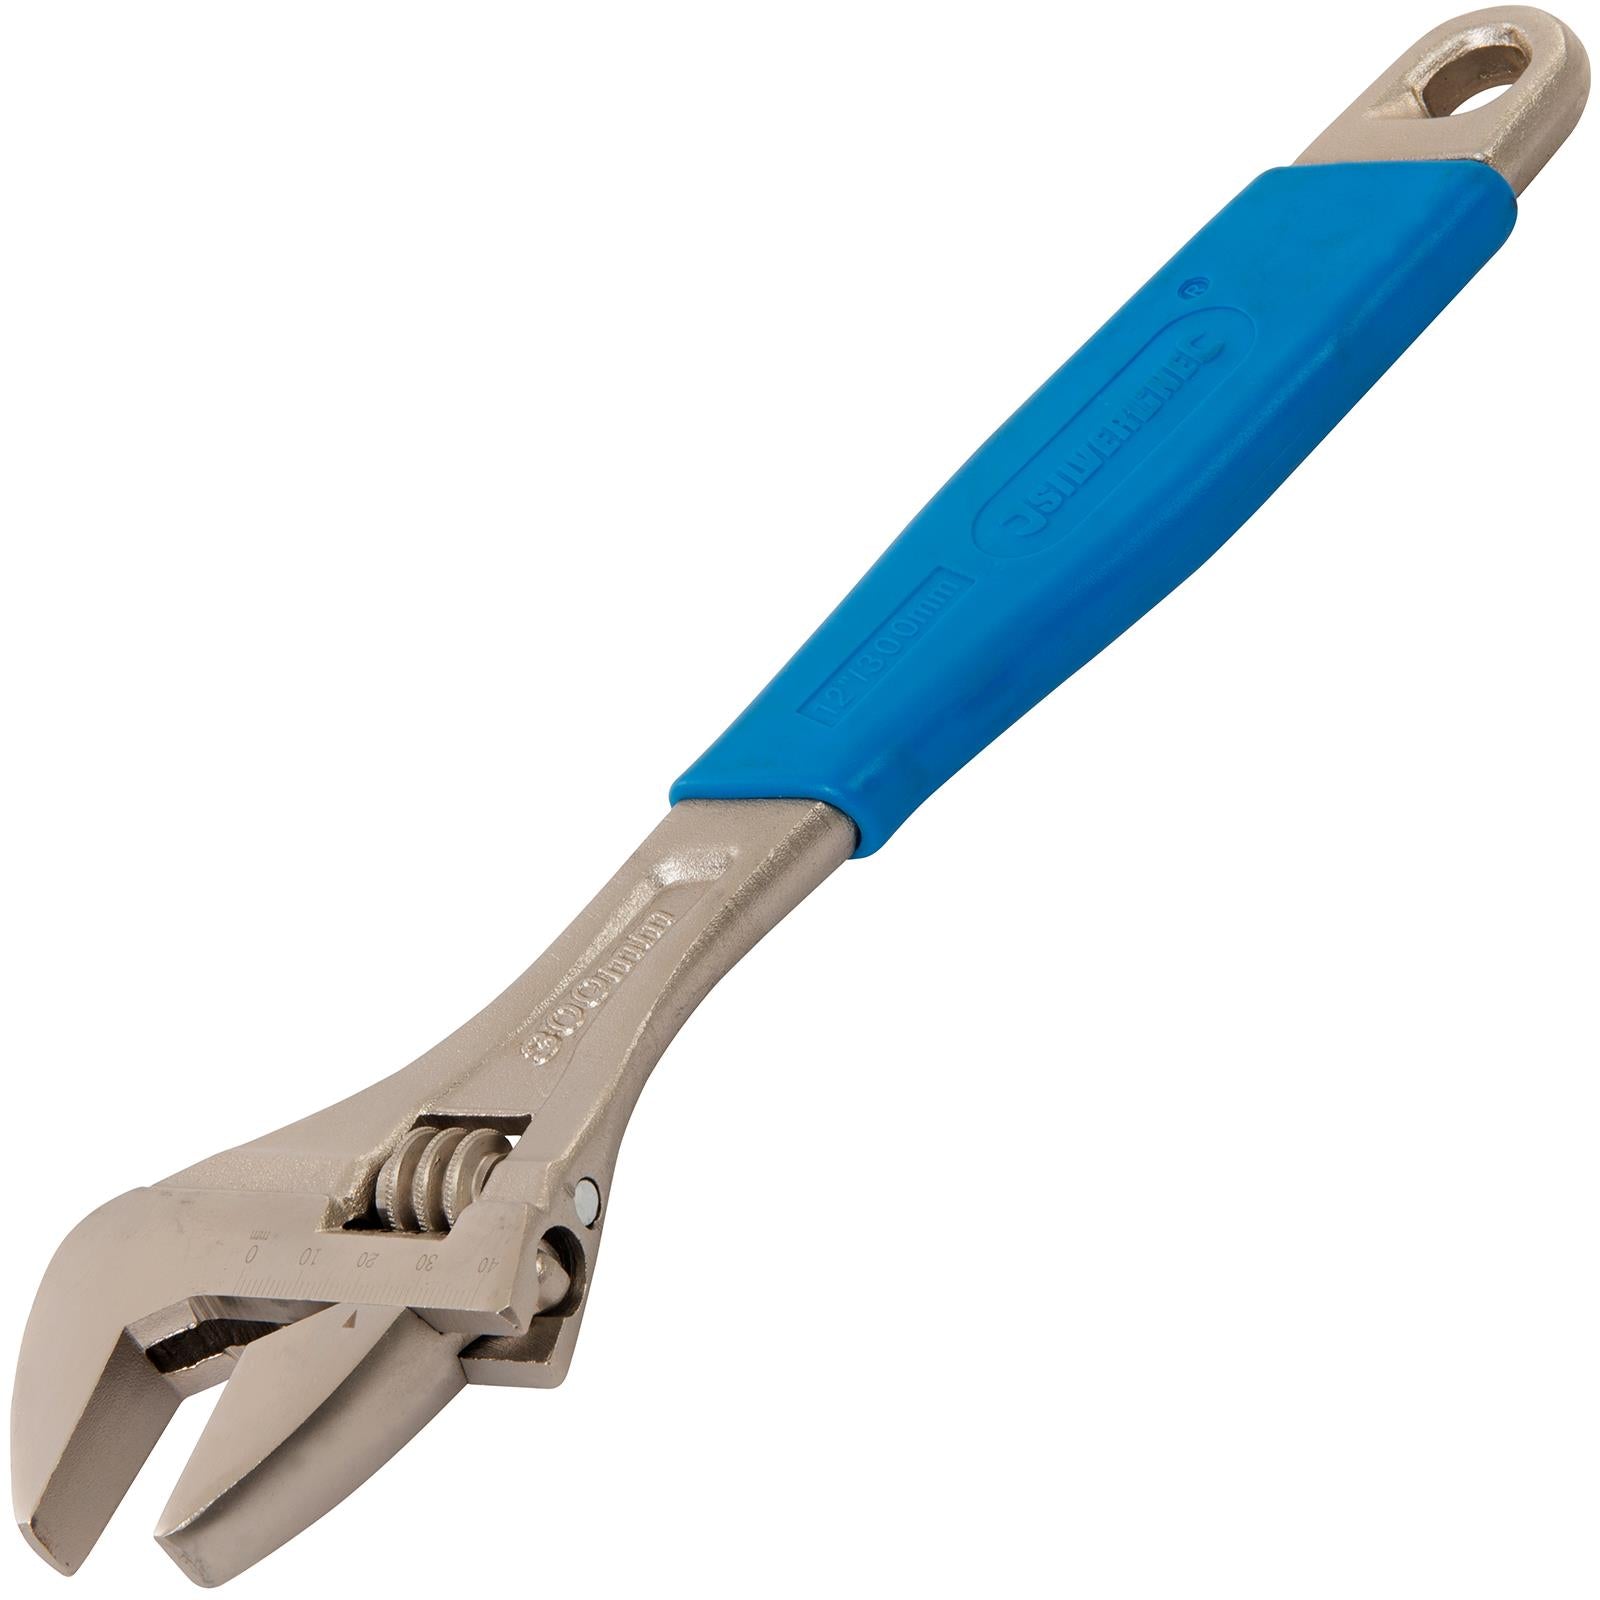 Silverline Soft Grip Adjustable Wrench 150, 200, 250 Or 300mm